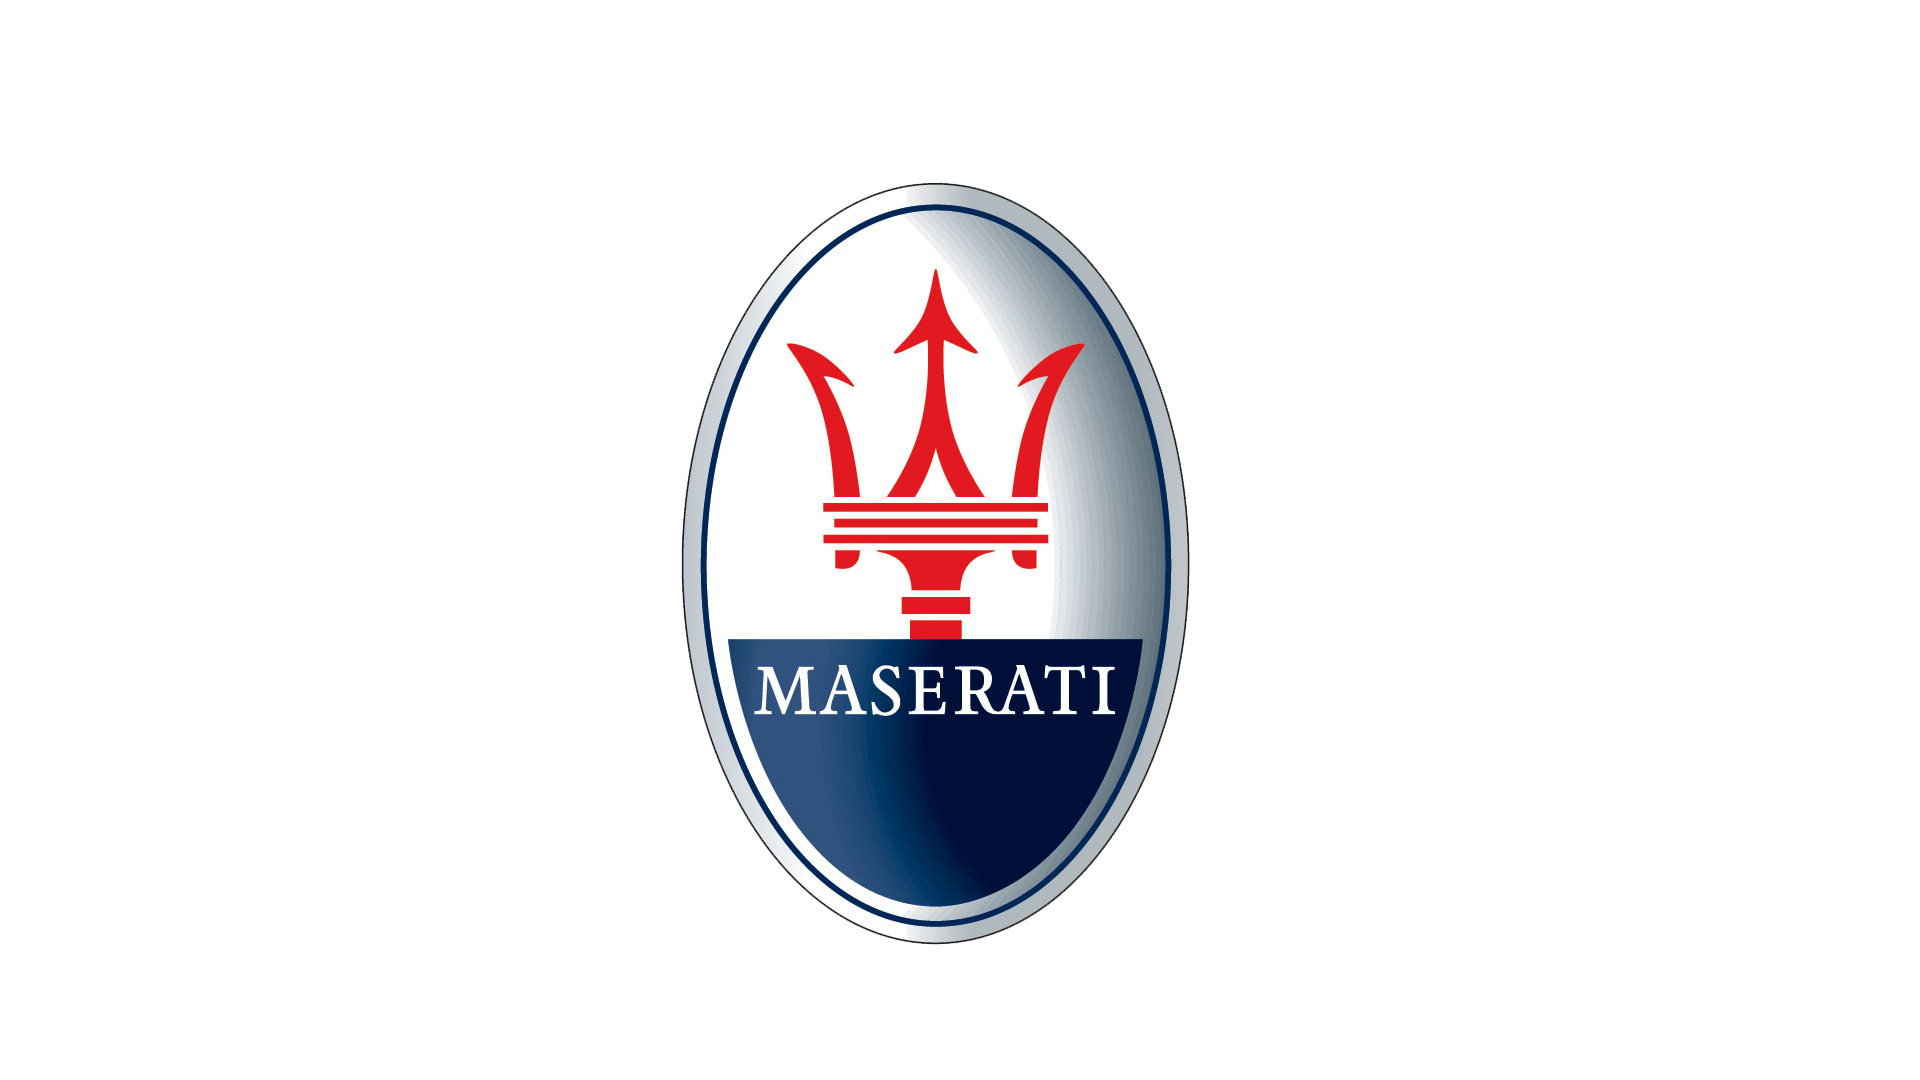 We have worked with Maserati